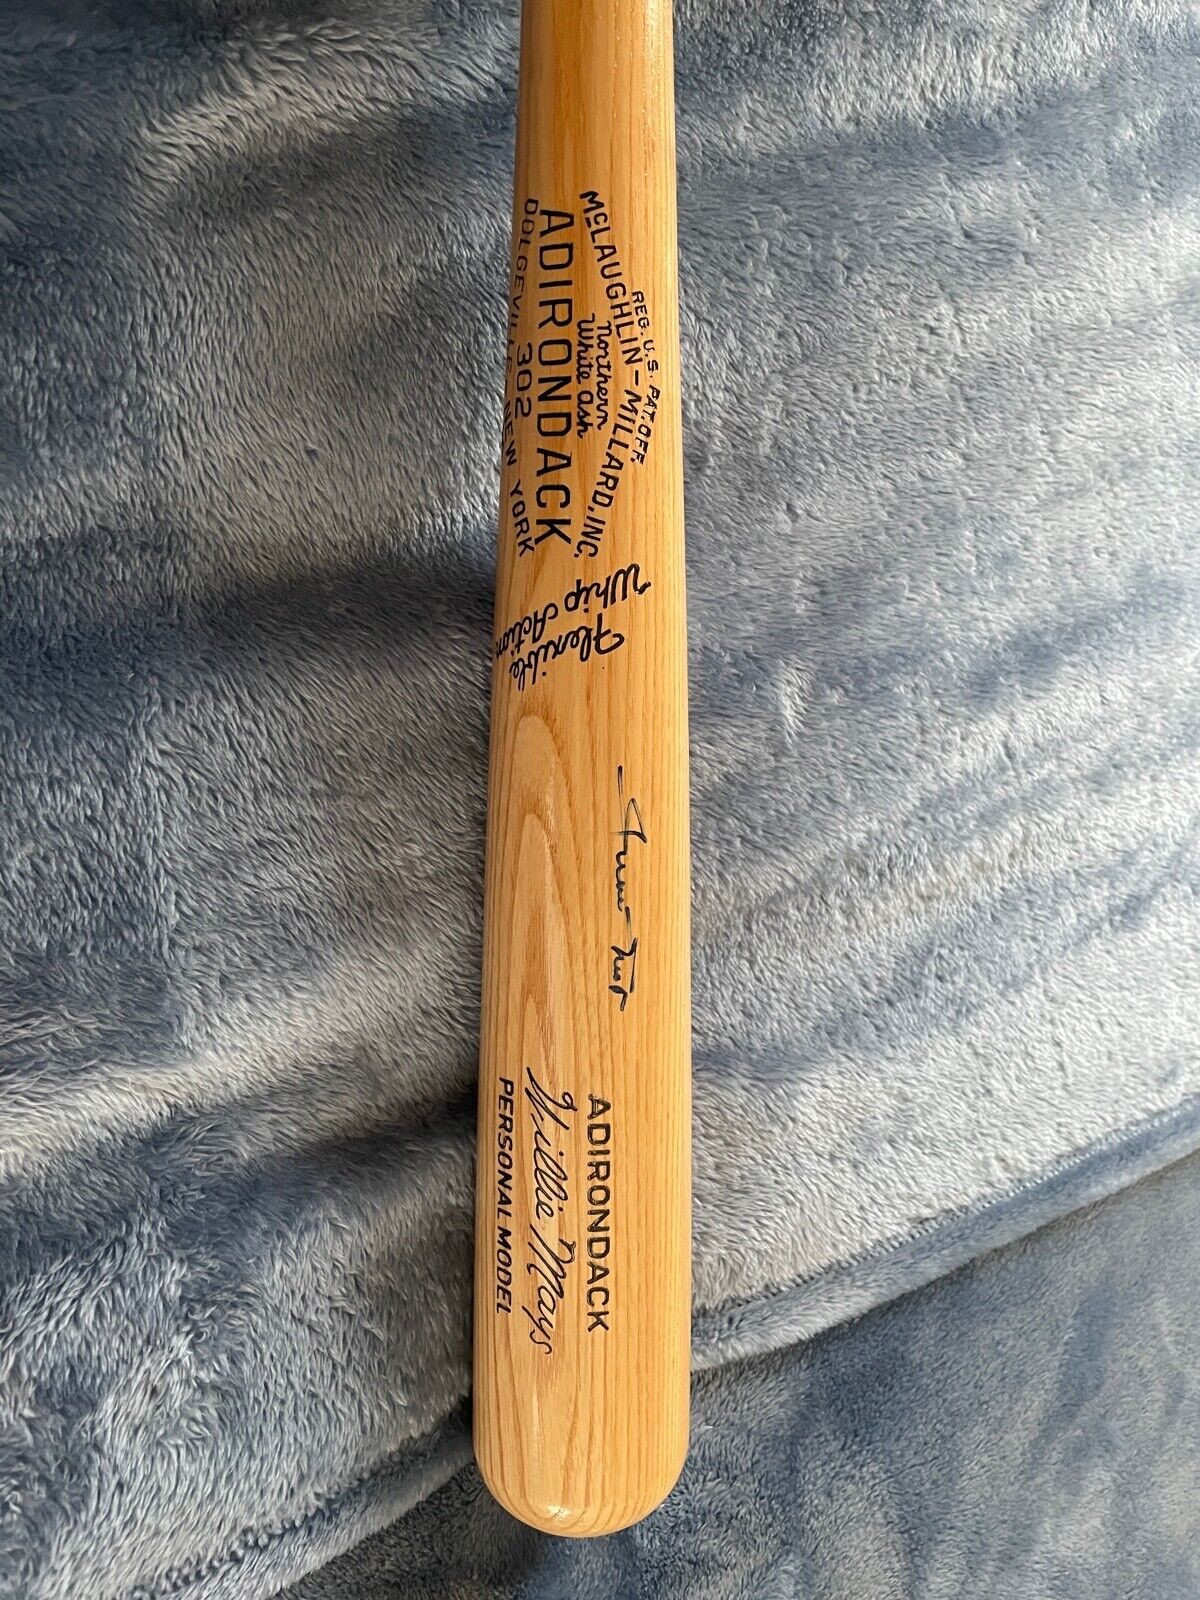 WILLIE MAYS SIGNED ADIRONDACK BAT THE SCORE BOARD AUTHENTICATED